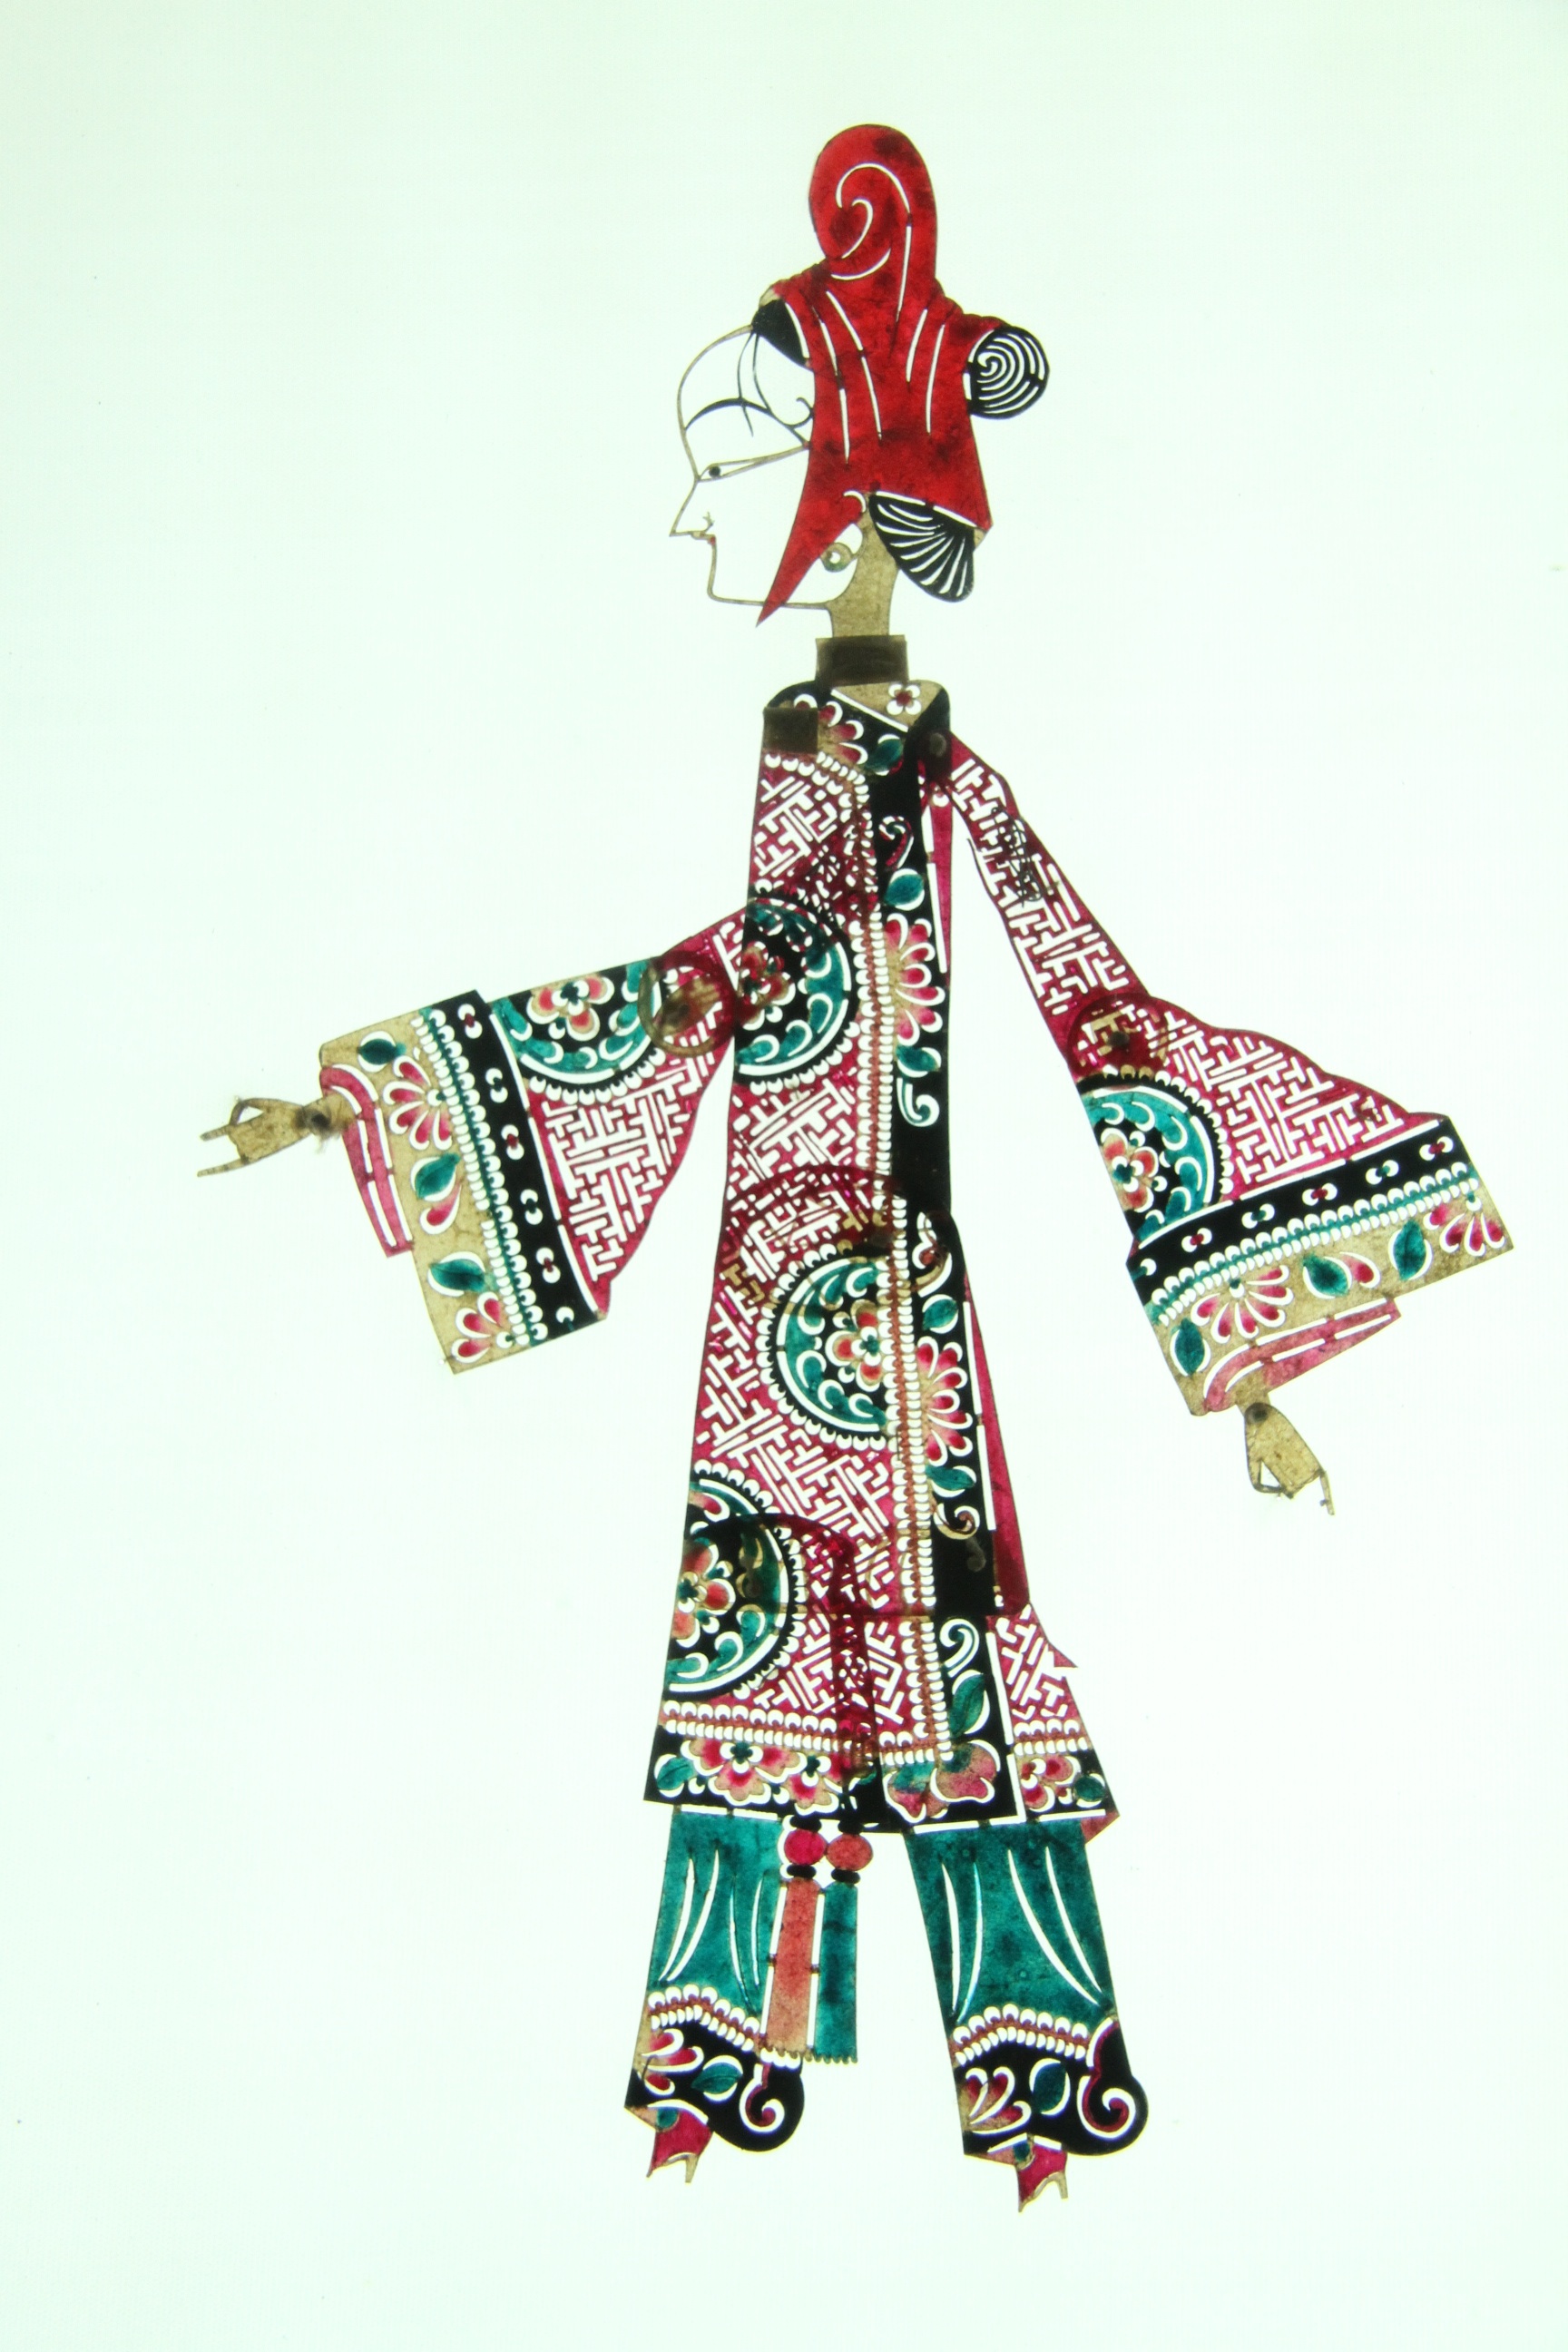 Chinese Puppets: Assembling the Old and the Live - &